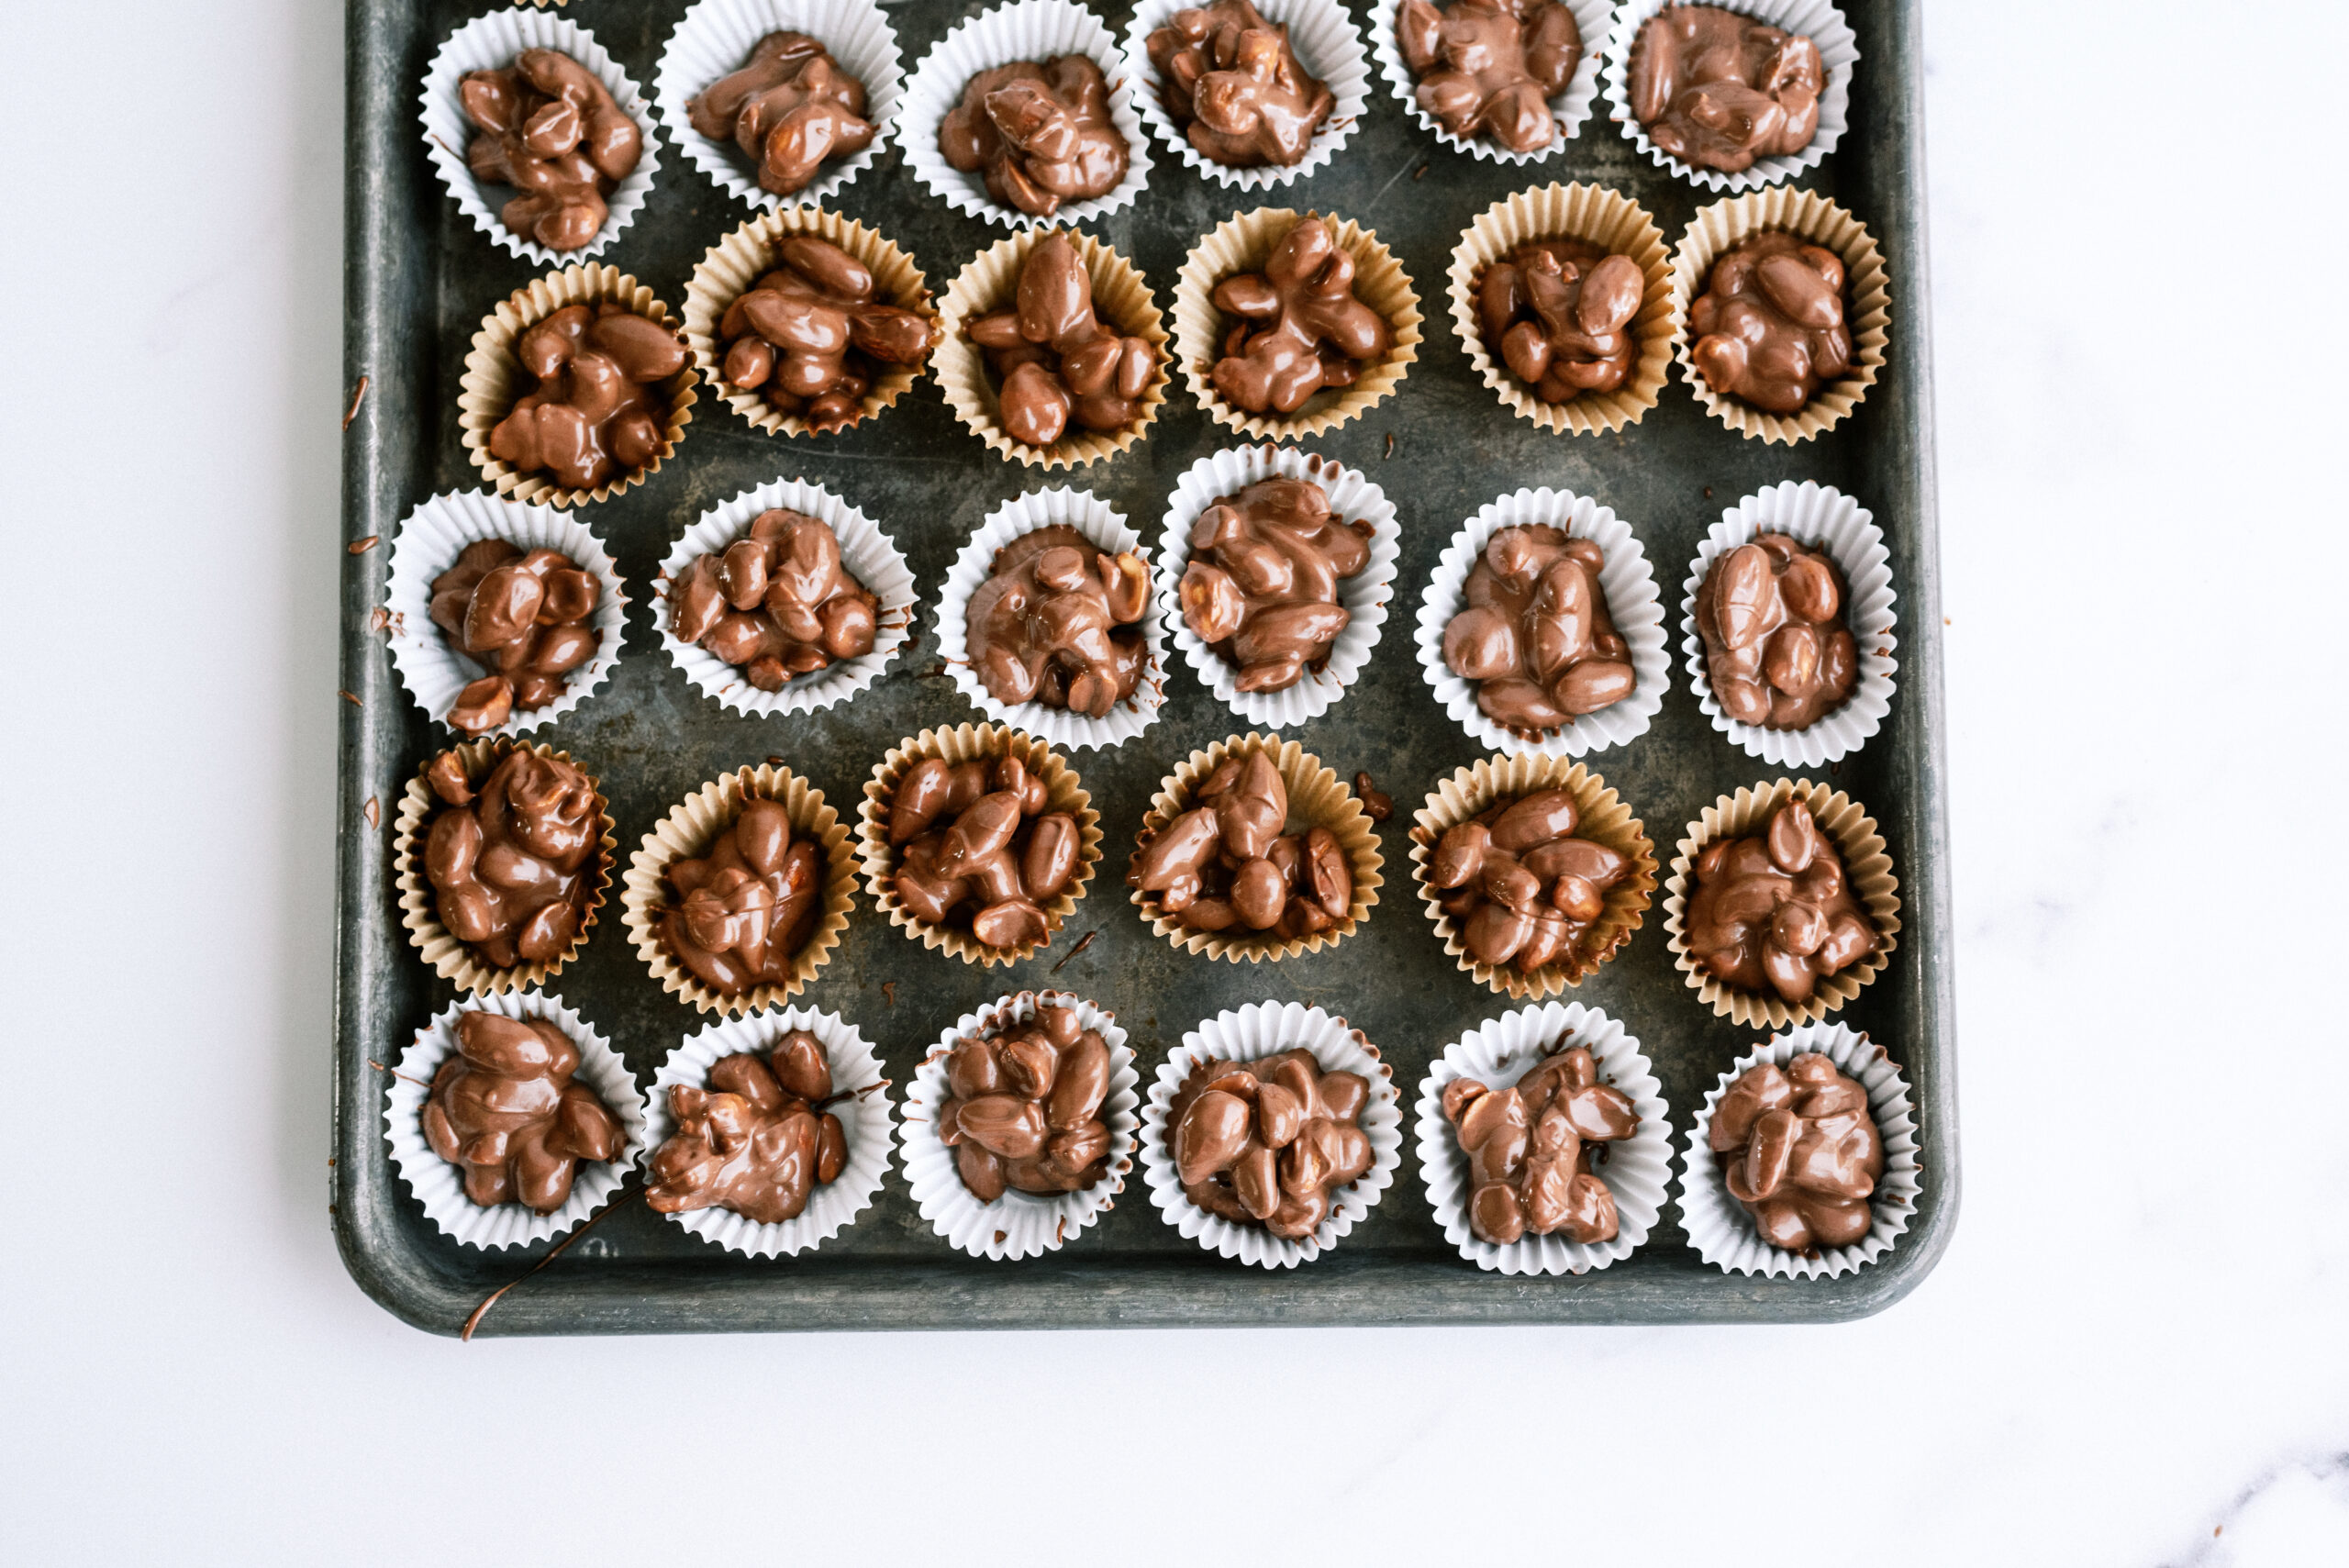 instant pot nut clusters all lined up on a baking sheet